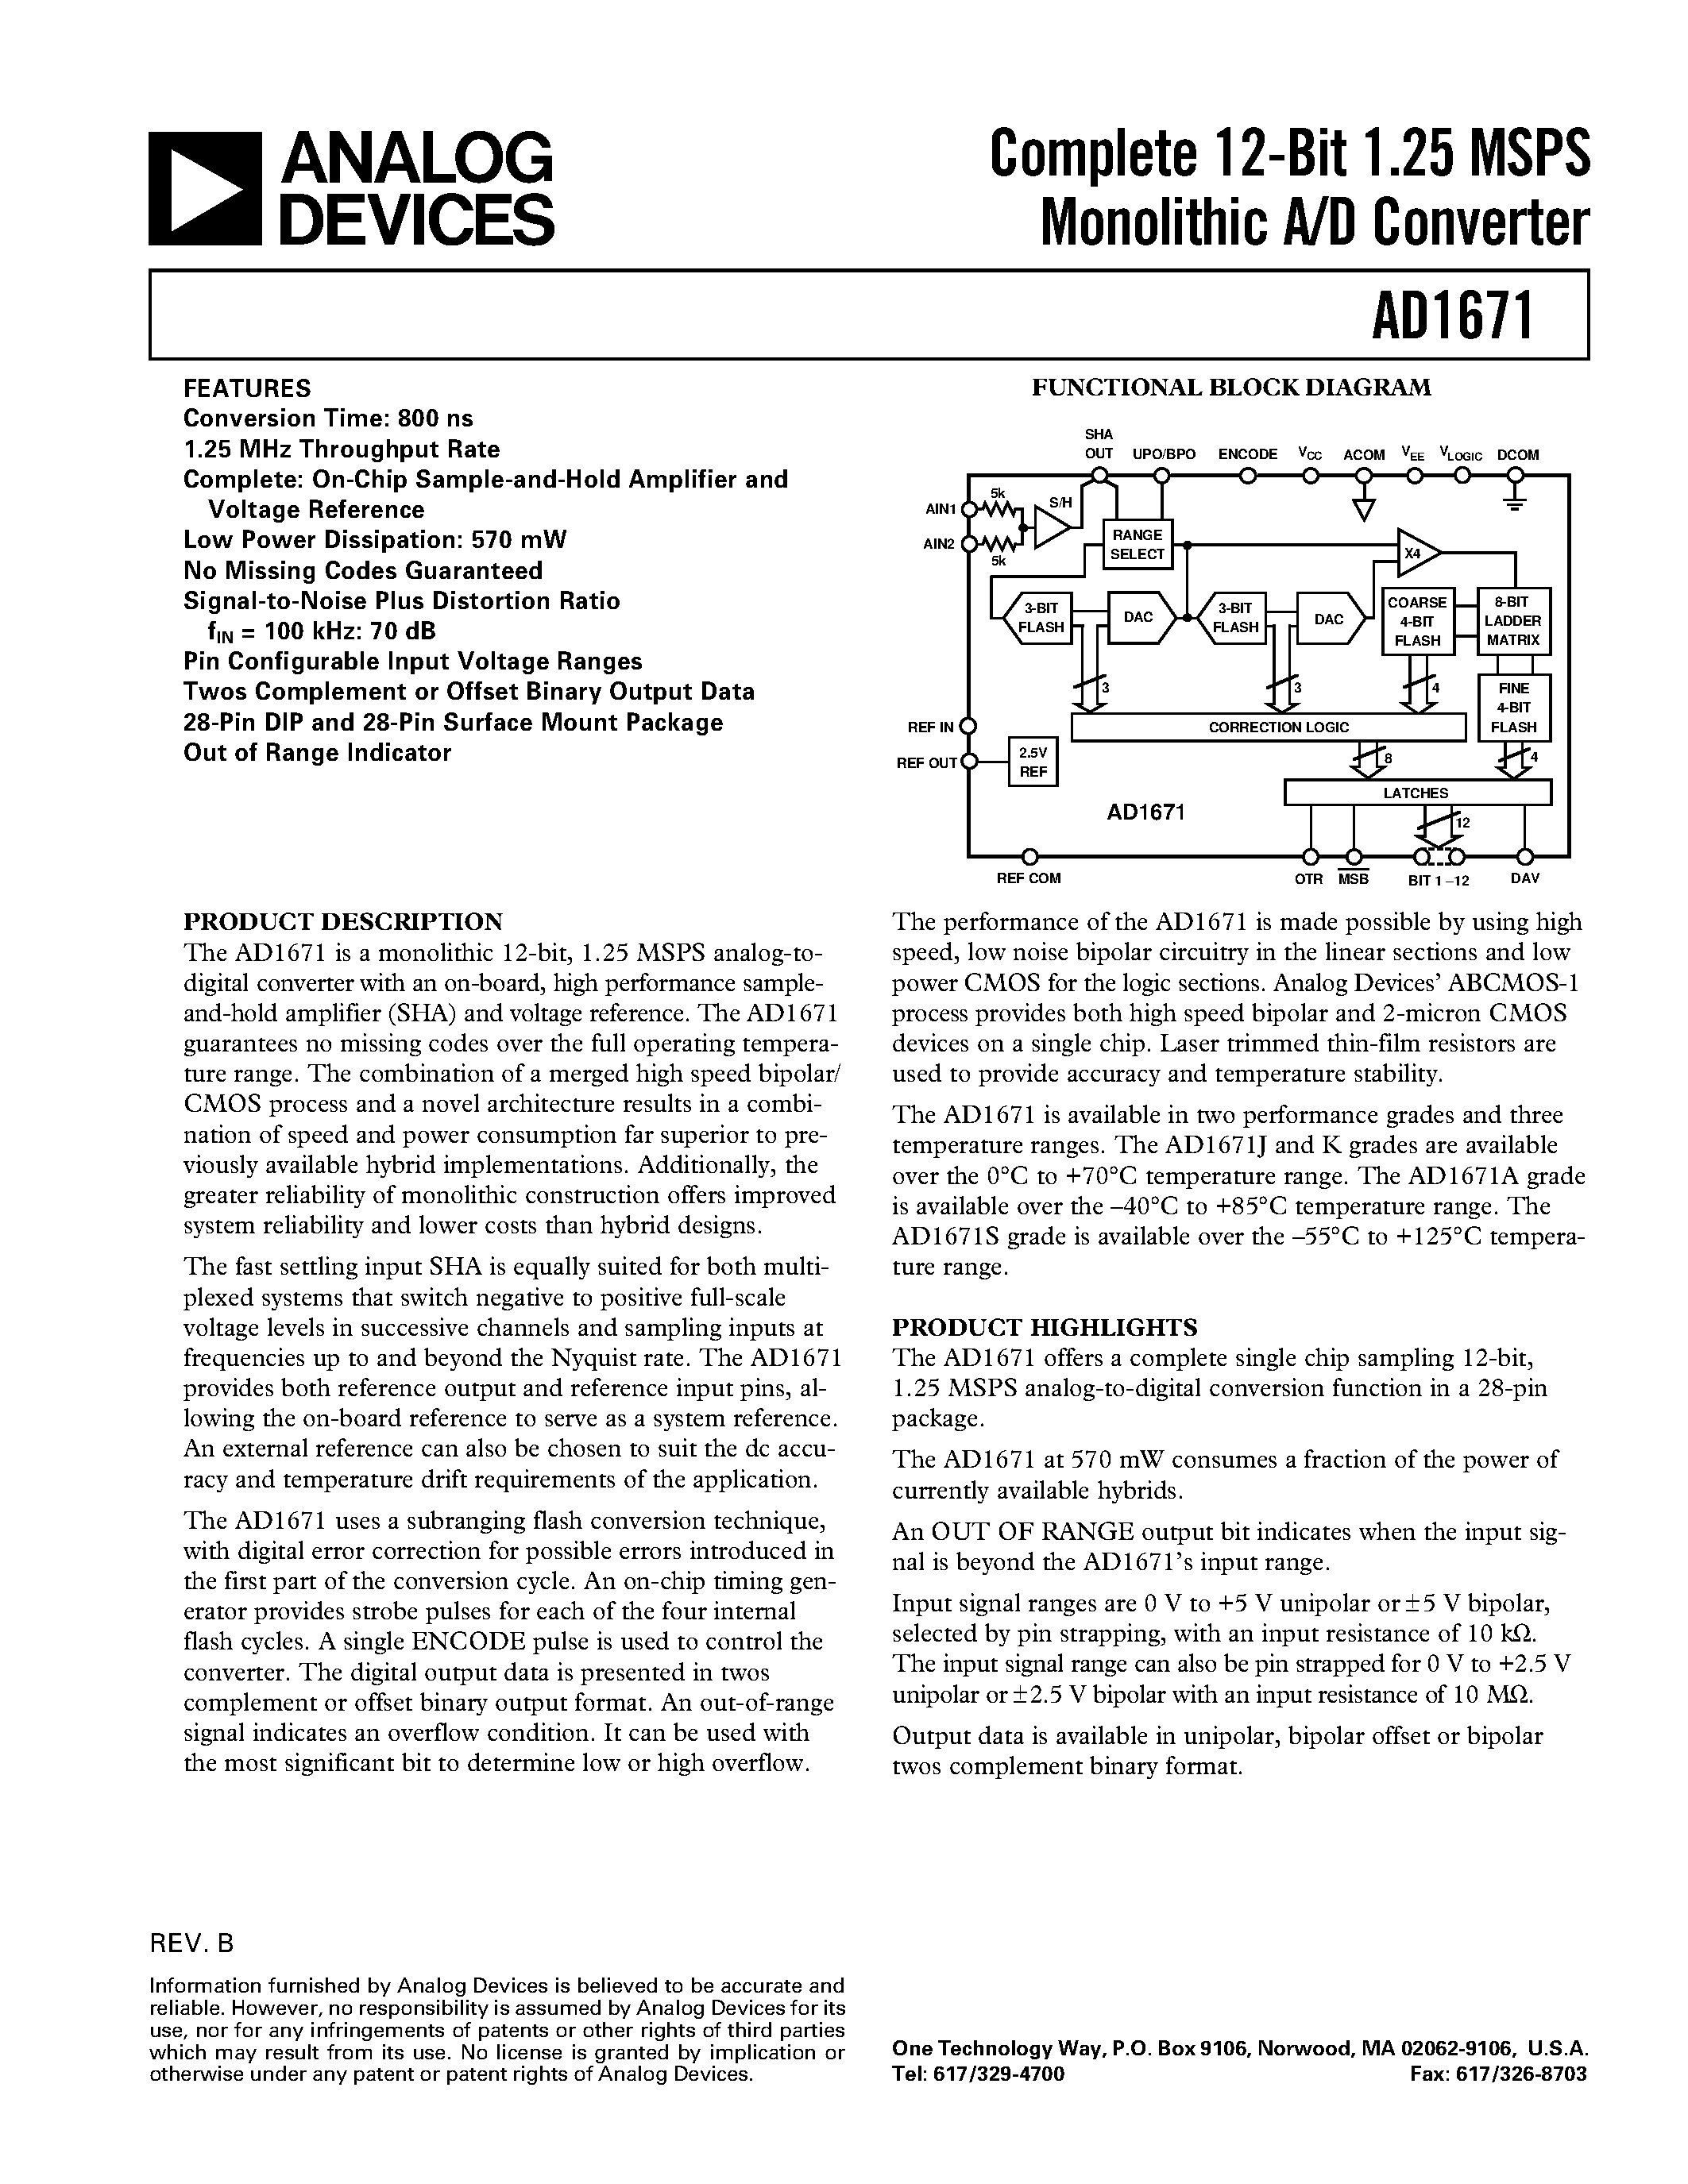 Datasheet AD1671KQ - Complete 12-Bit 1.25 MSPS Monolithic A/D Converter page 1